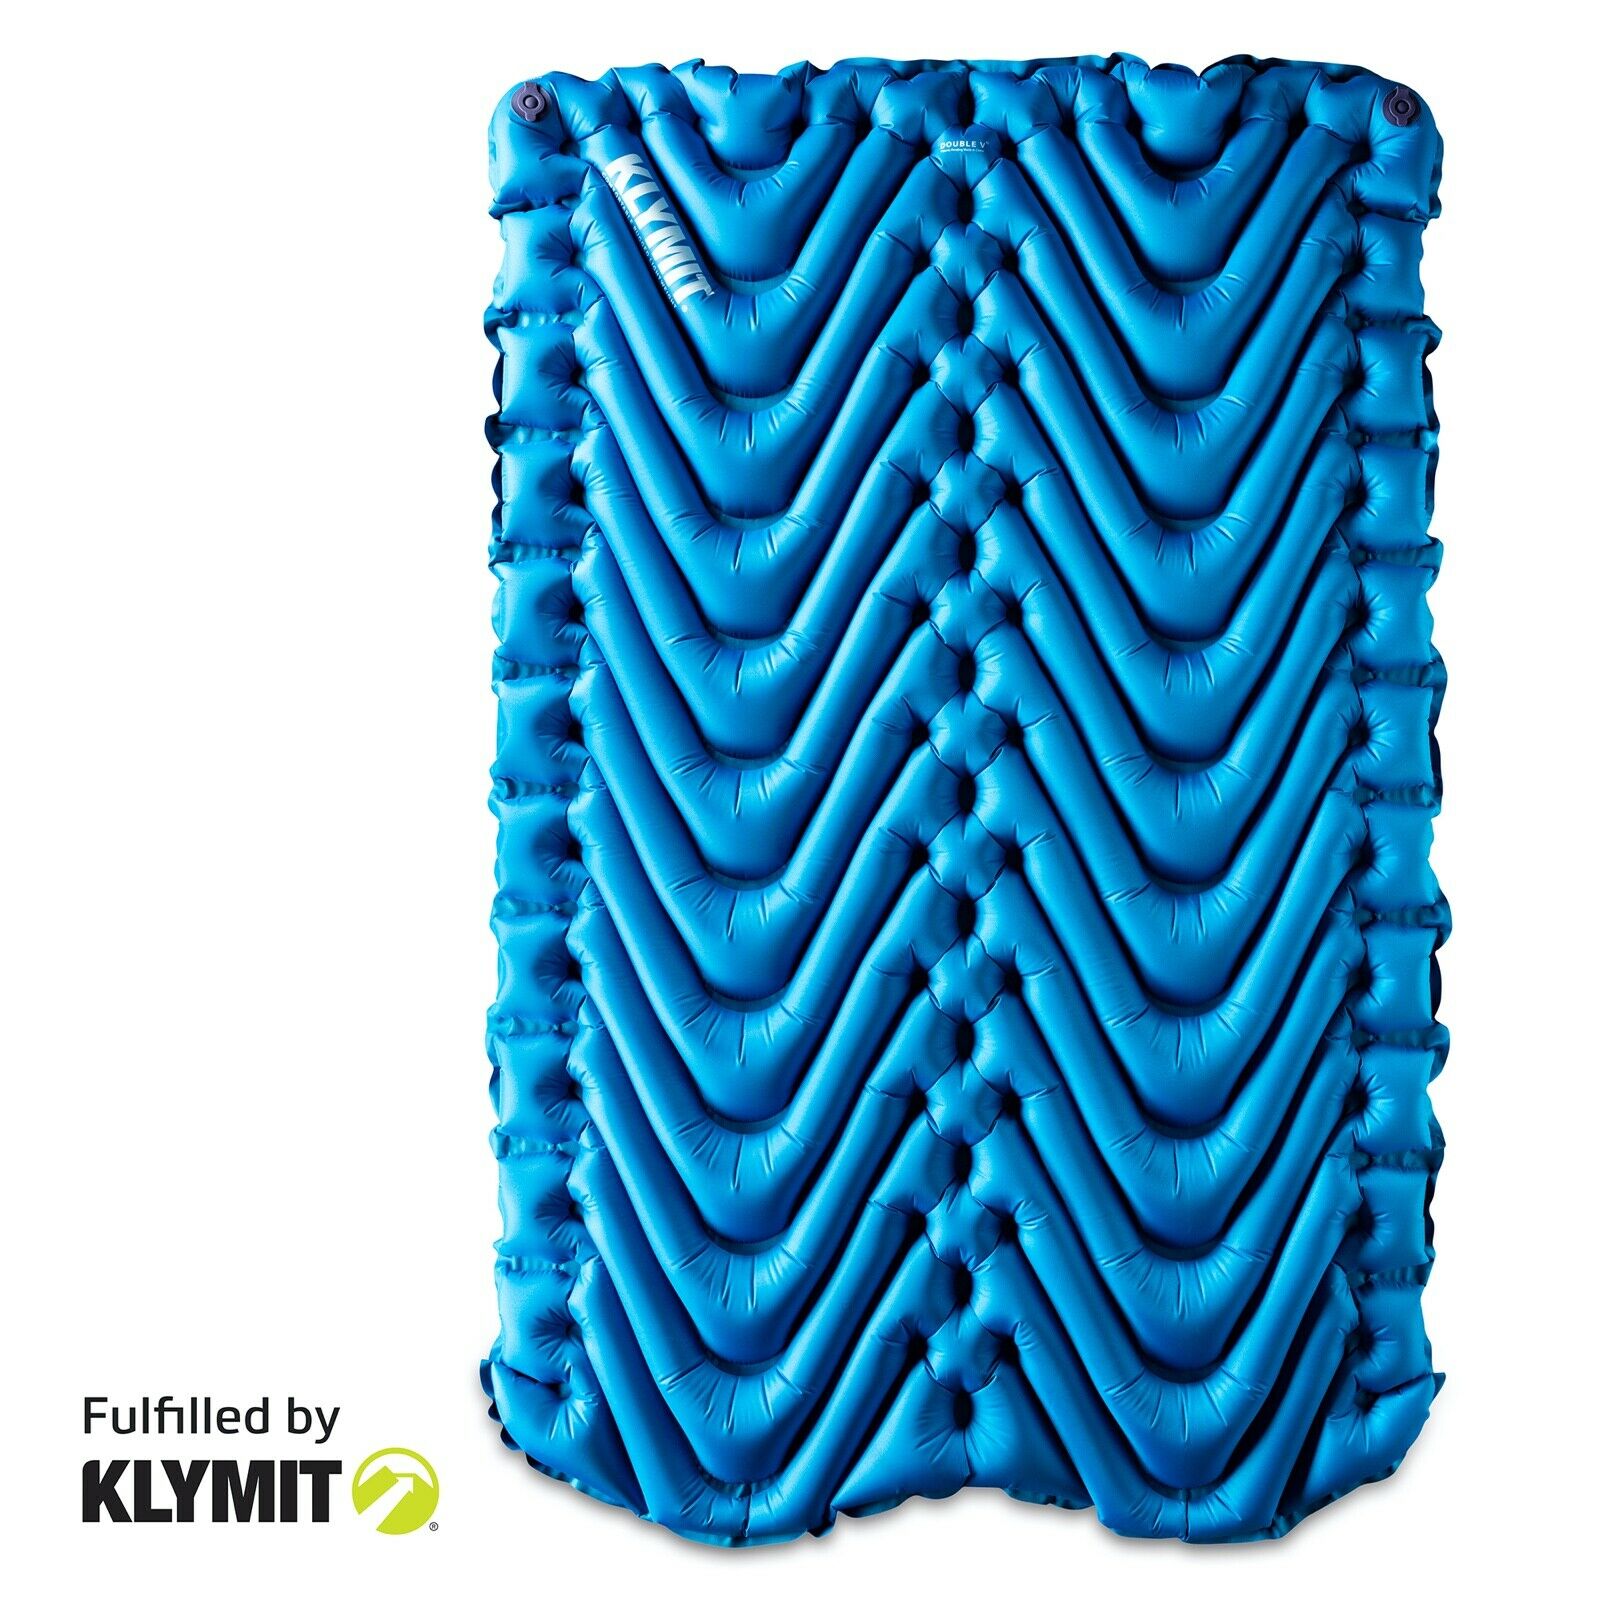 KLYMIT Double V Two-person Camping Sleeping Pad - Certified Refurbished